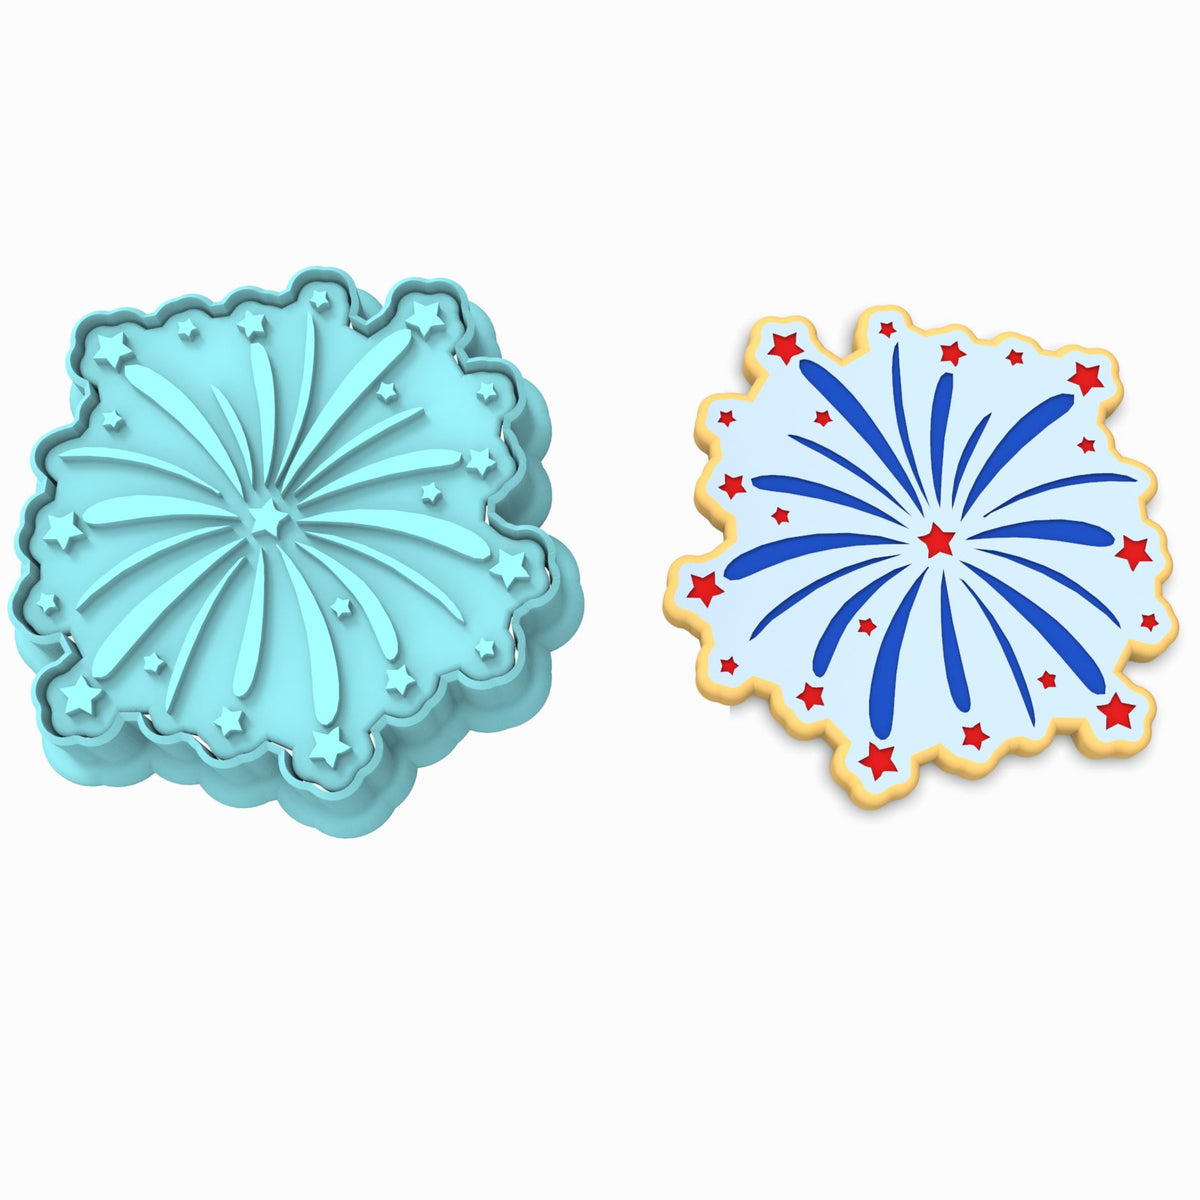 Bakeshop SNOWFLAKE Set With 2 Jumbo Large And 2 Small Cookie Cutters